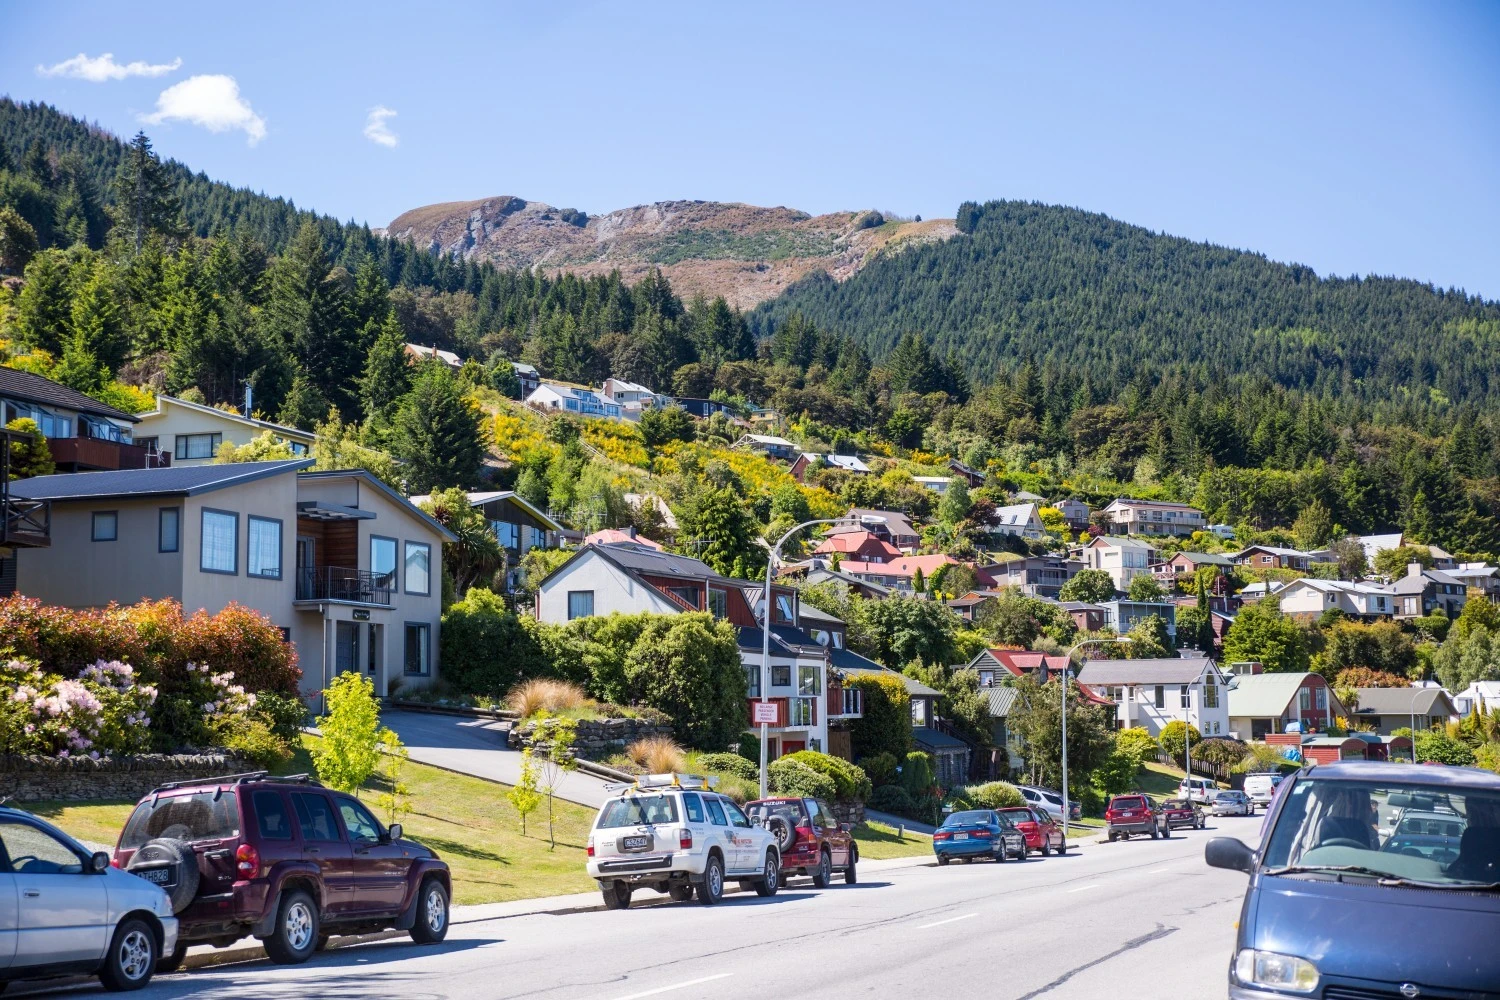 5 Things to Consider Before Moving to A Small Town in New Zealand